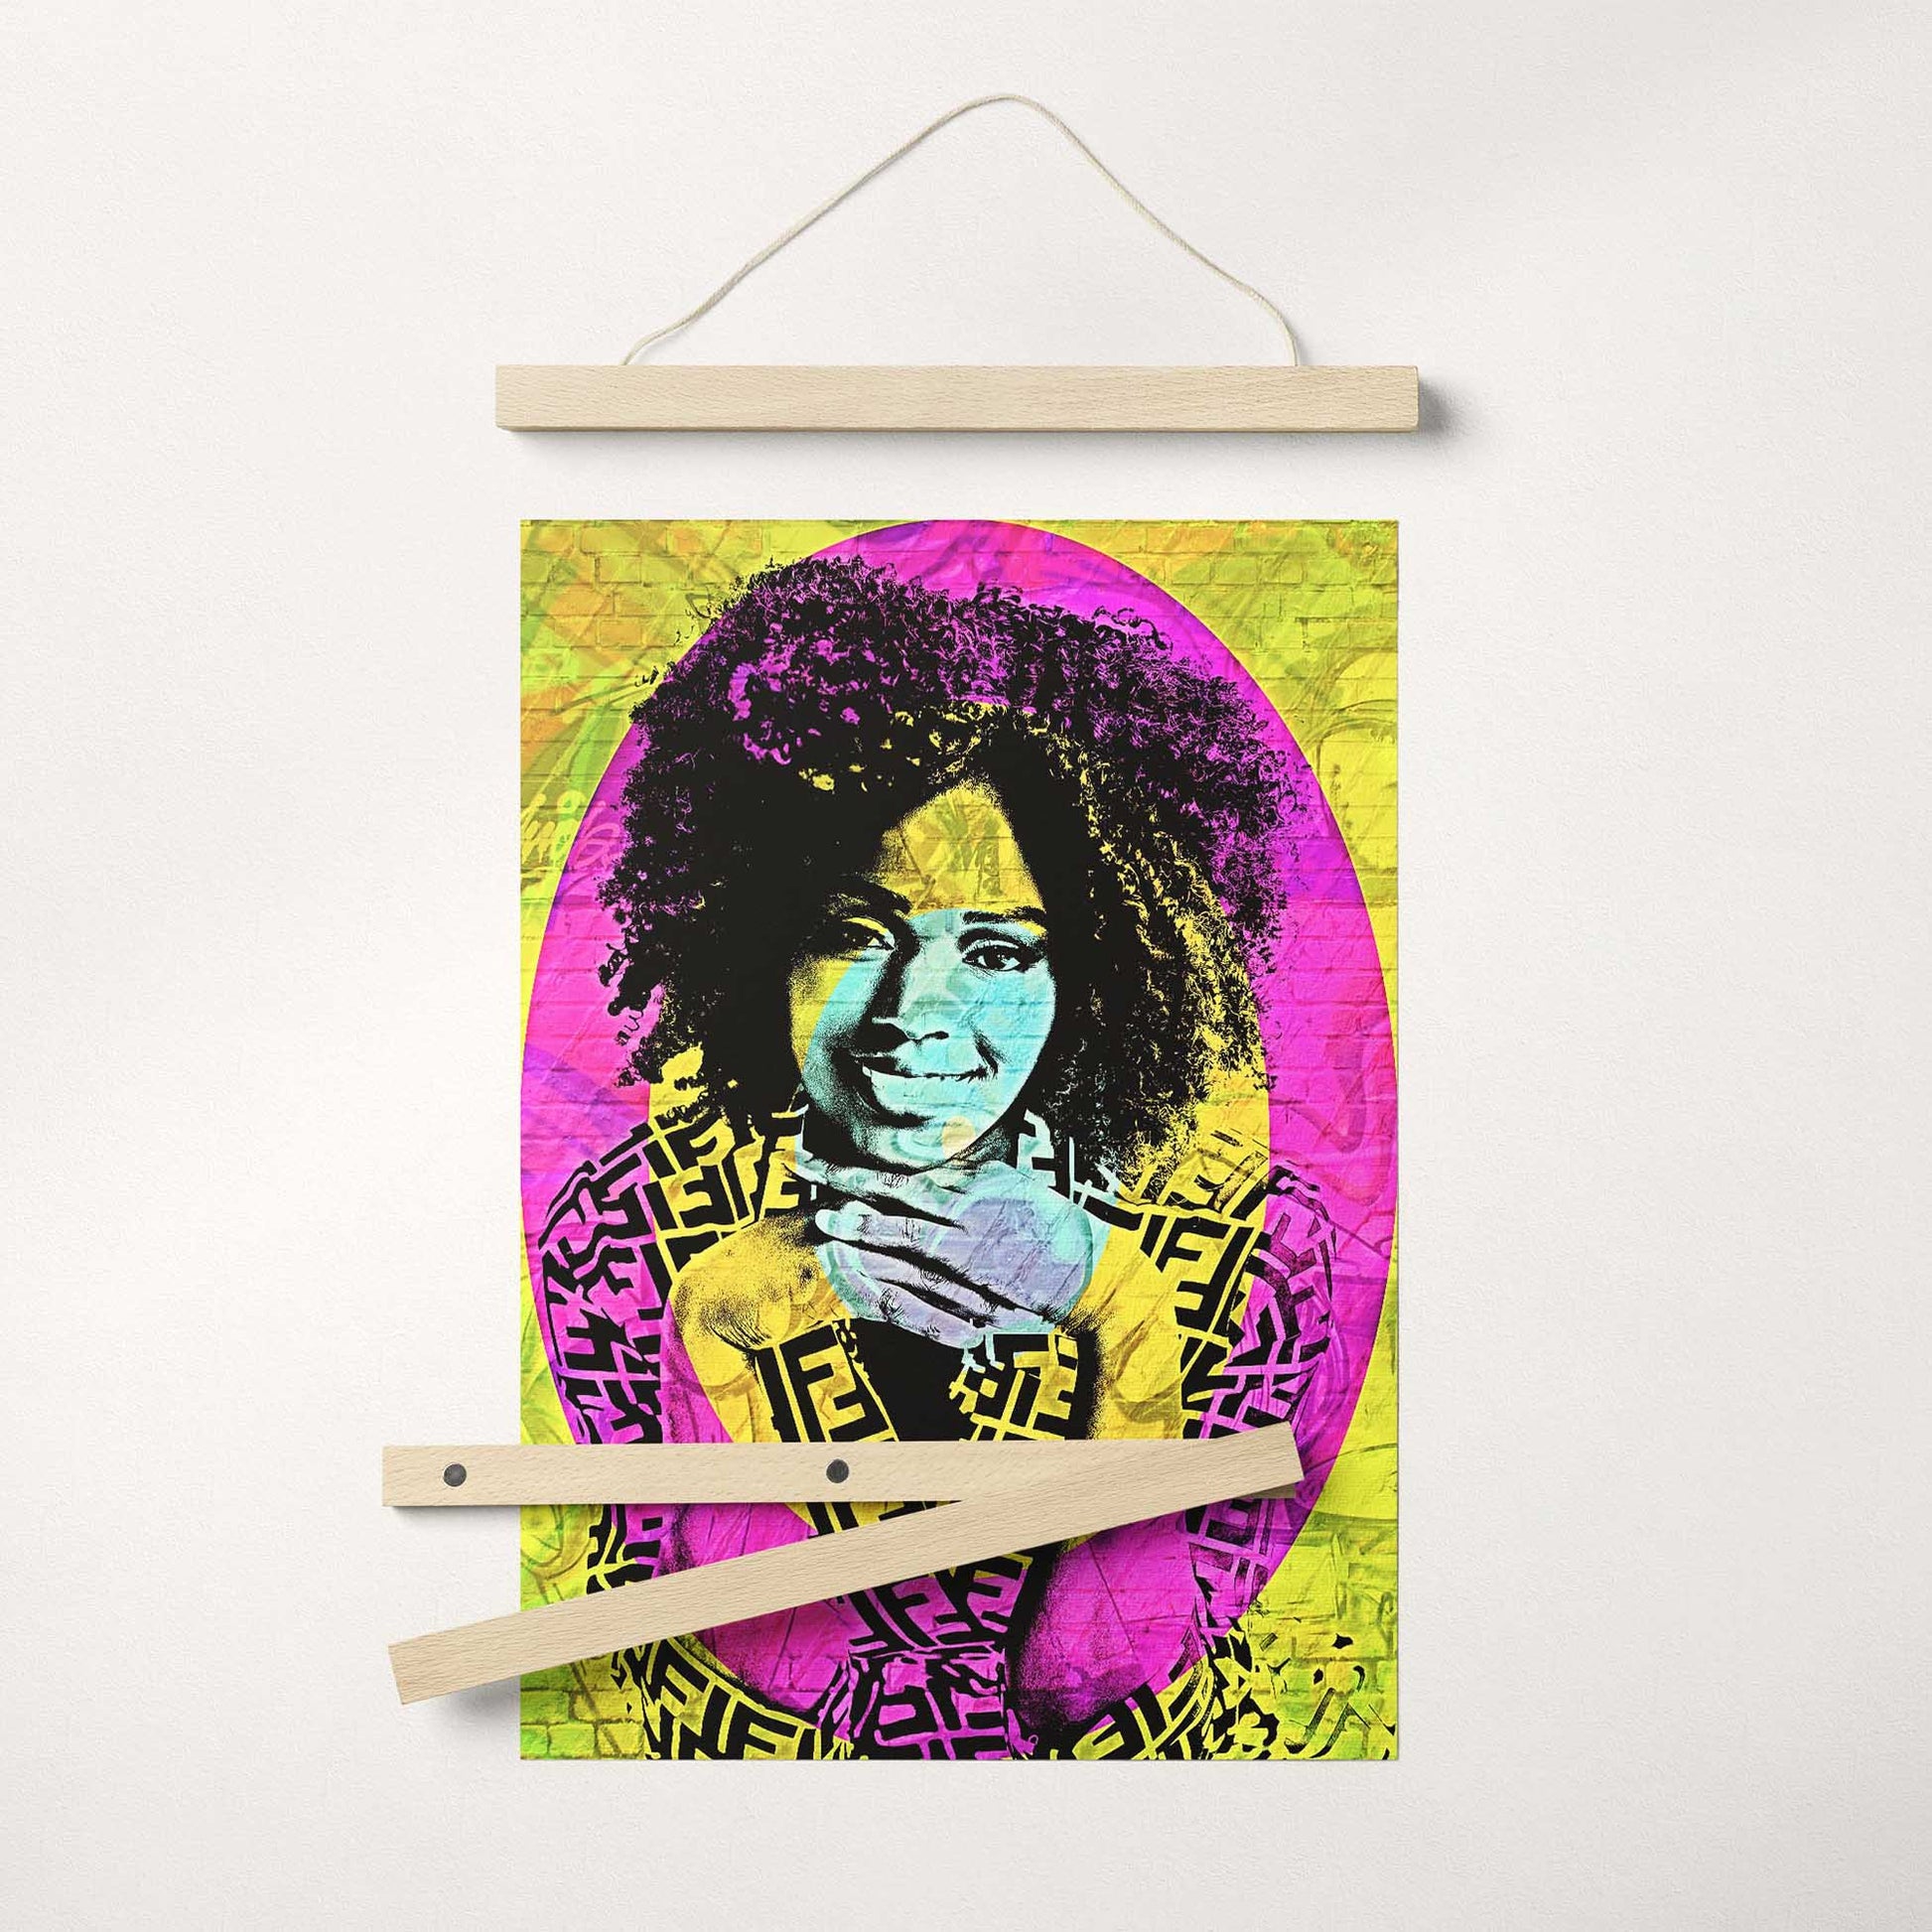 Add a touch of urban charm to your space with the Personalised Graffiti Street Art Poster Hanger. Its cool graffiti style and street art filter create a vibrant and dynamic wall art decor that stands out. Made with high-quality materials